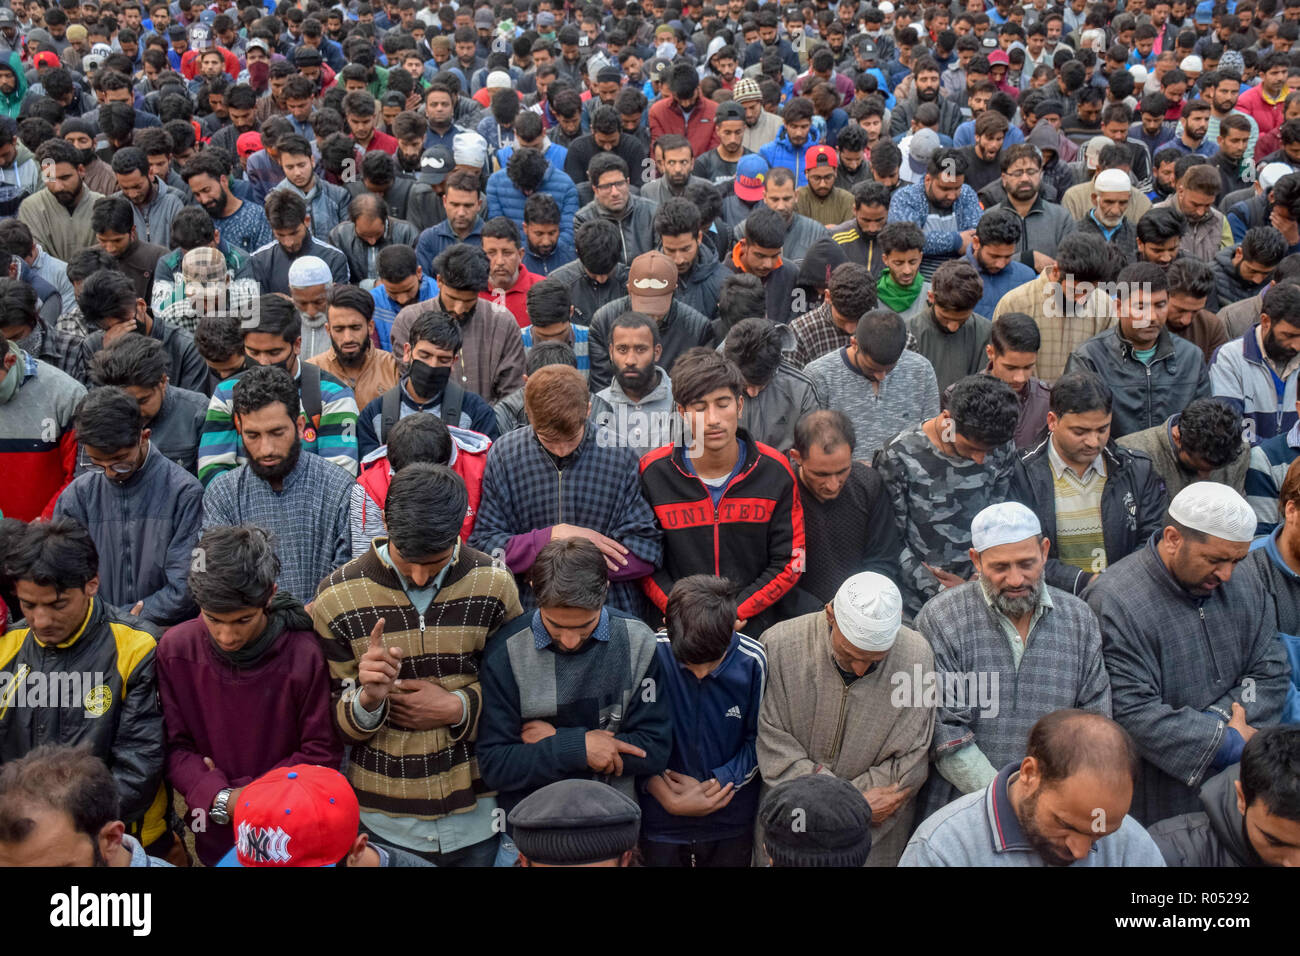 Kashmiri Muslims are seen offering funeral prayers for slain militant Mohd Amin at his residence in Pampore.Thousands of people took part in the funeral prayers of one of the slain militants, Mohd Amin in Pampore area of Pulwama south Kashmir some 20kms from summer capital of Srinagar, Official say two militants were killed in a brief gunfight with Indian forces. Credit: Idrees Abbas/SOPA Images/ZUMA Wire/Alamy Live News Stock Photo